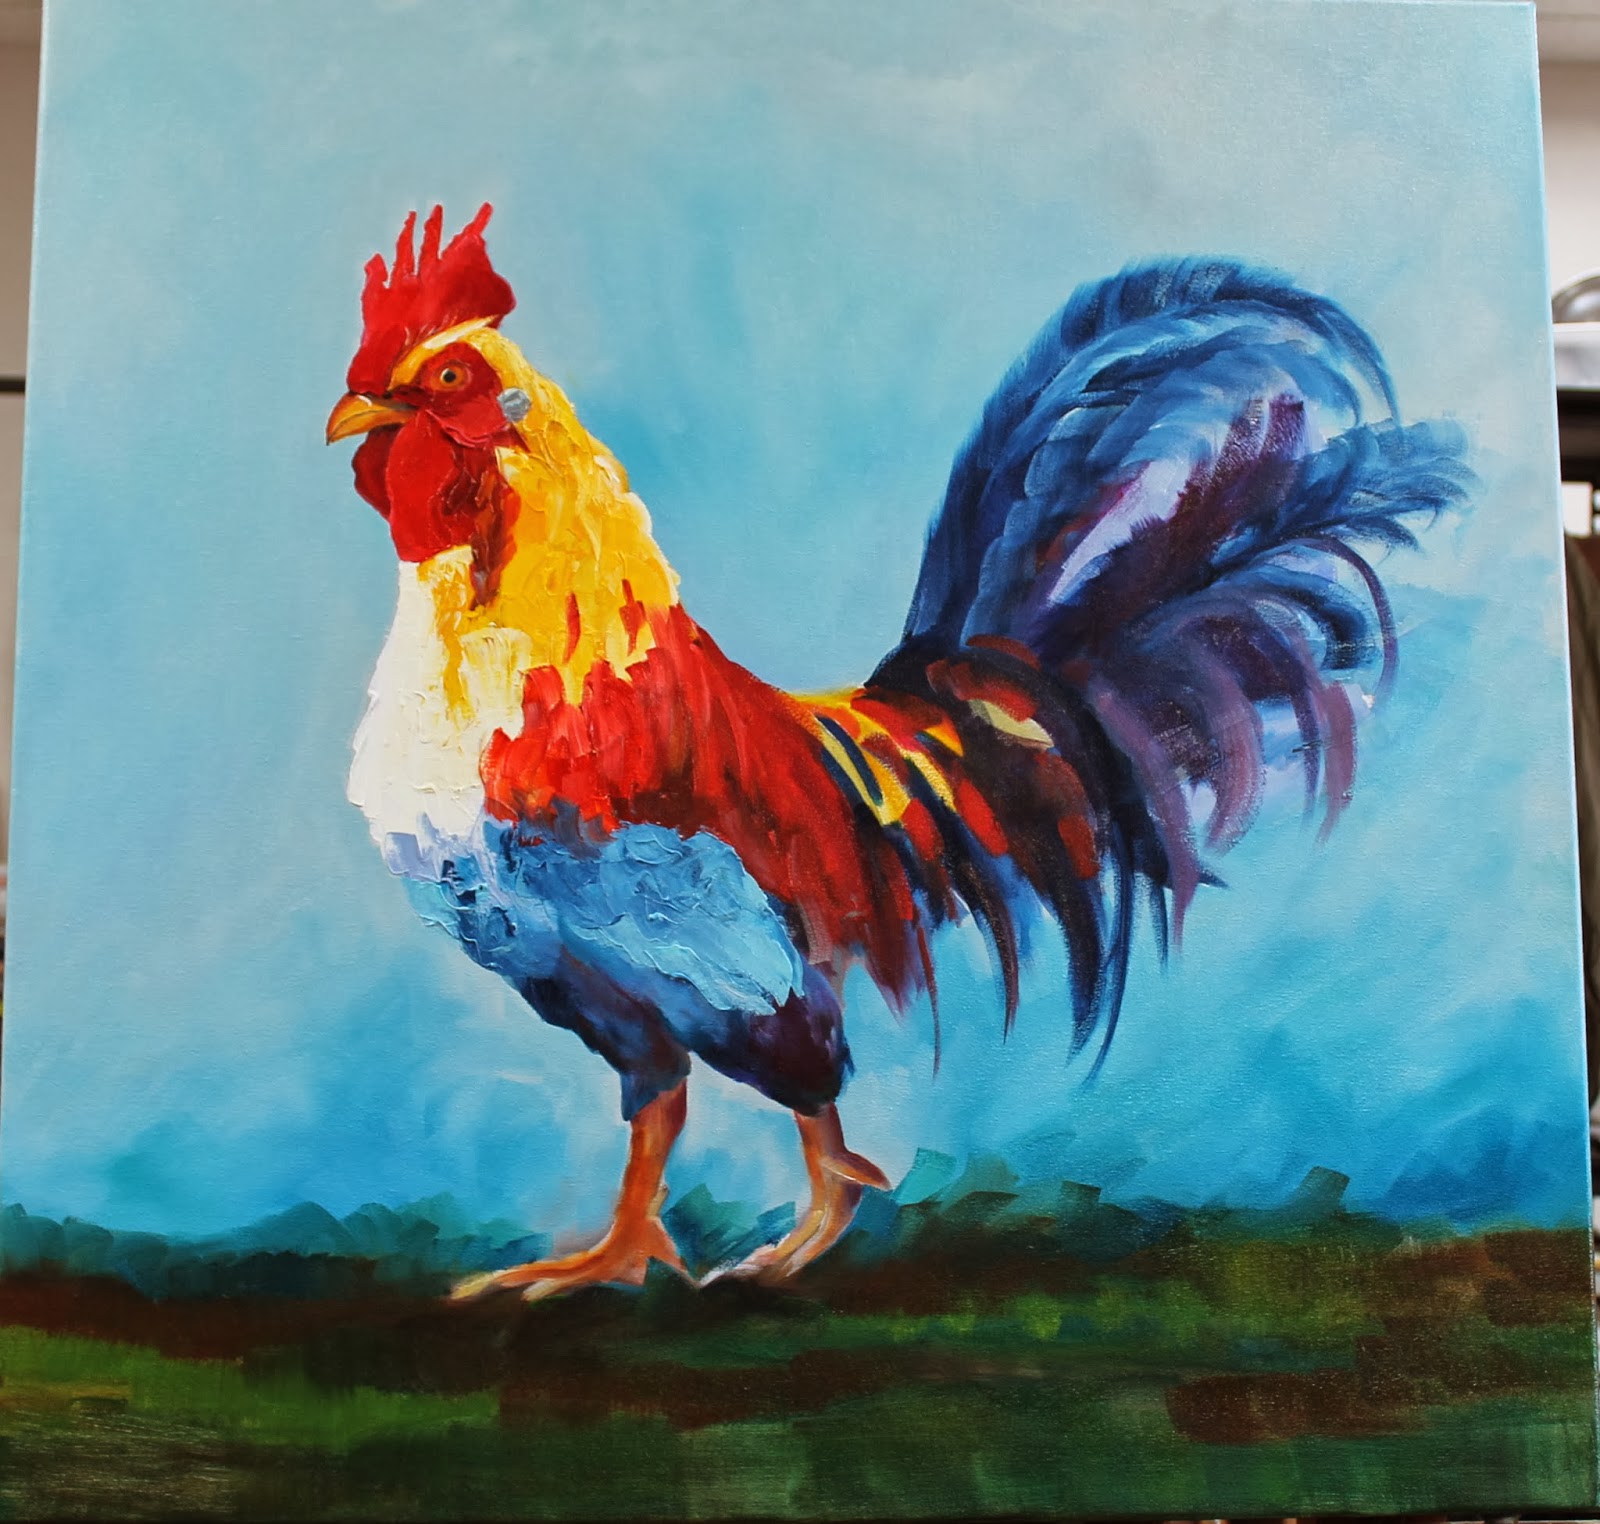 Mister Rooster by Kay Wyne - Sold.